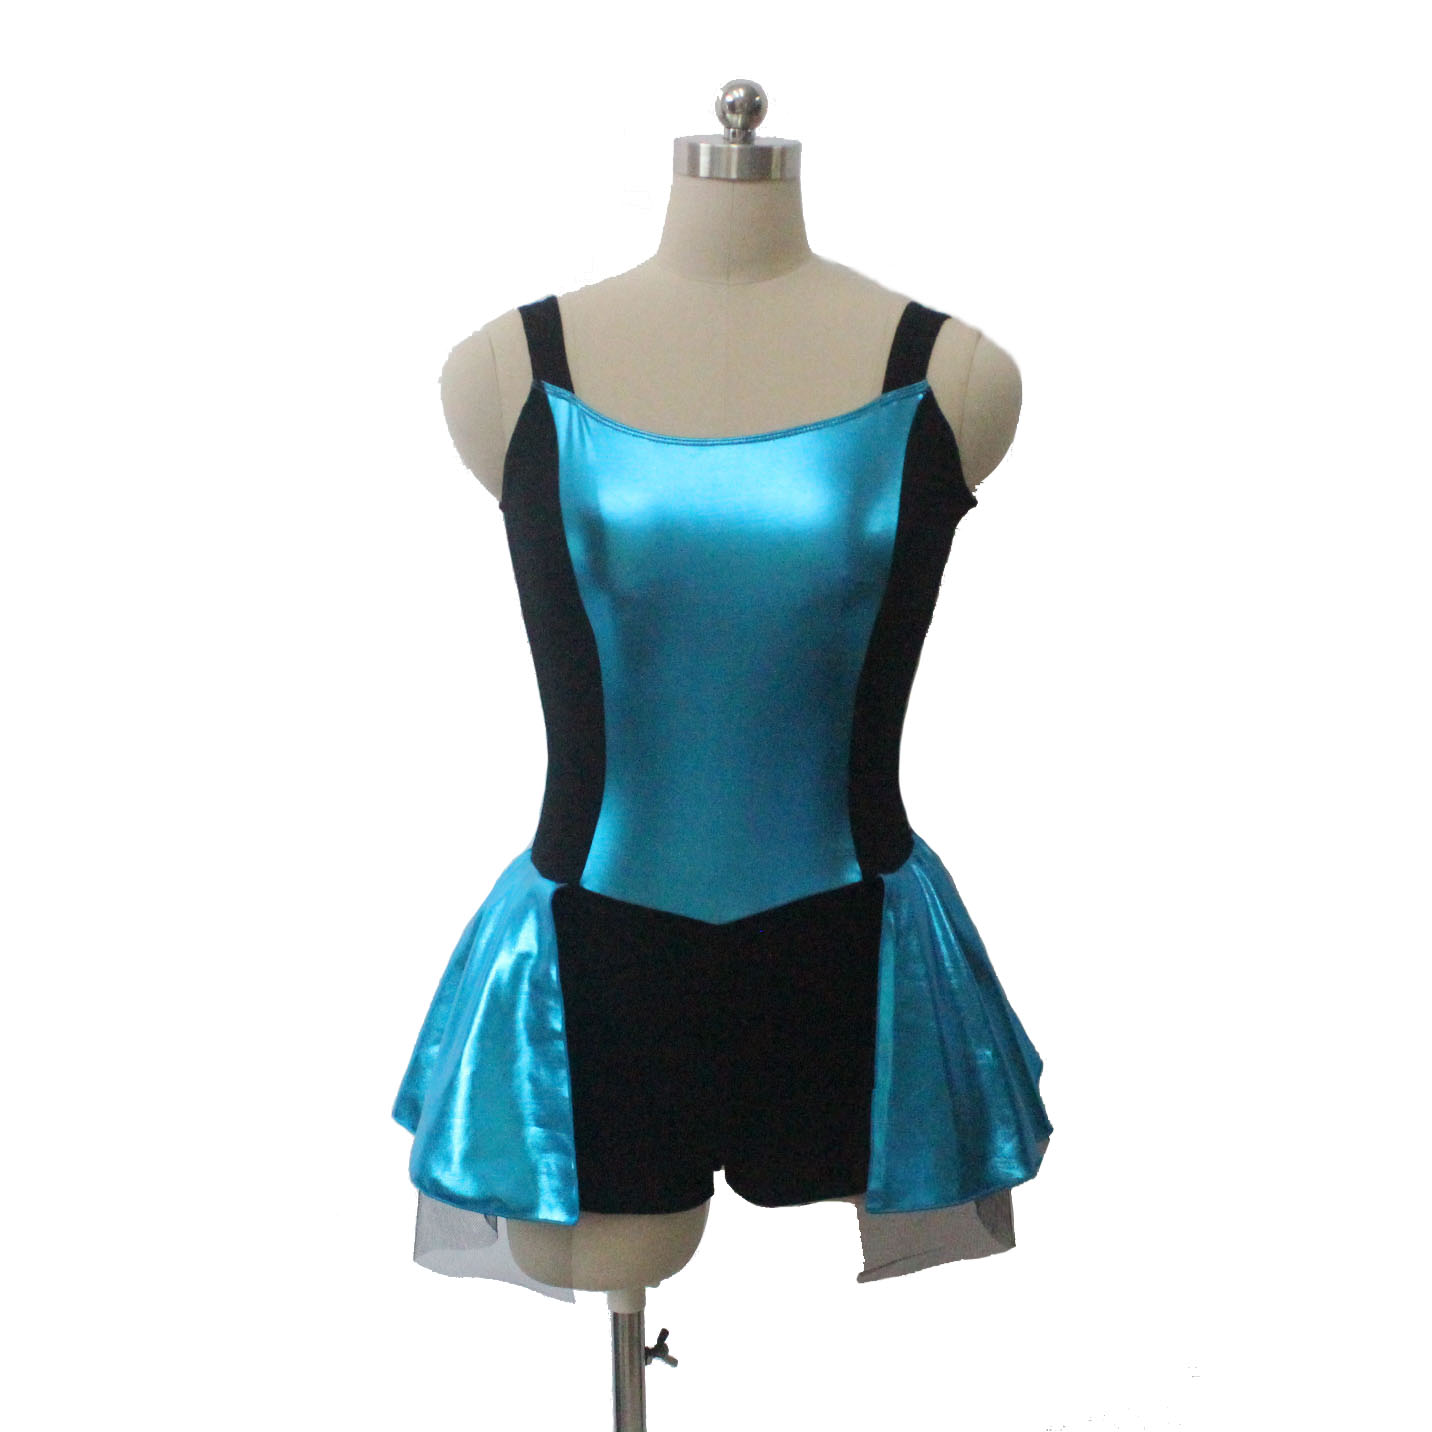 Hi Wendy
 
The costumes are fantastic! Thank you.
 
I had 2 students try them on today, and they look great and are comfortable.
 
Looking forward to seeing the little sample for us!
 
Regards,
 
Donna